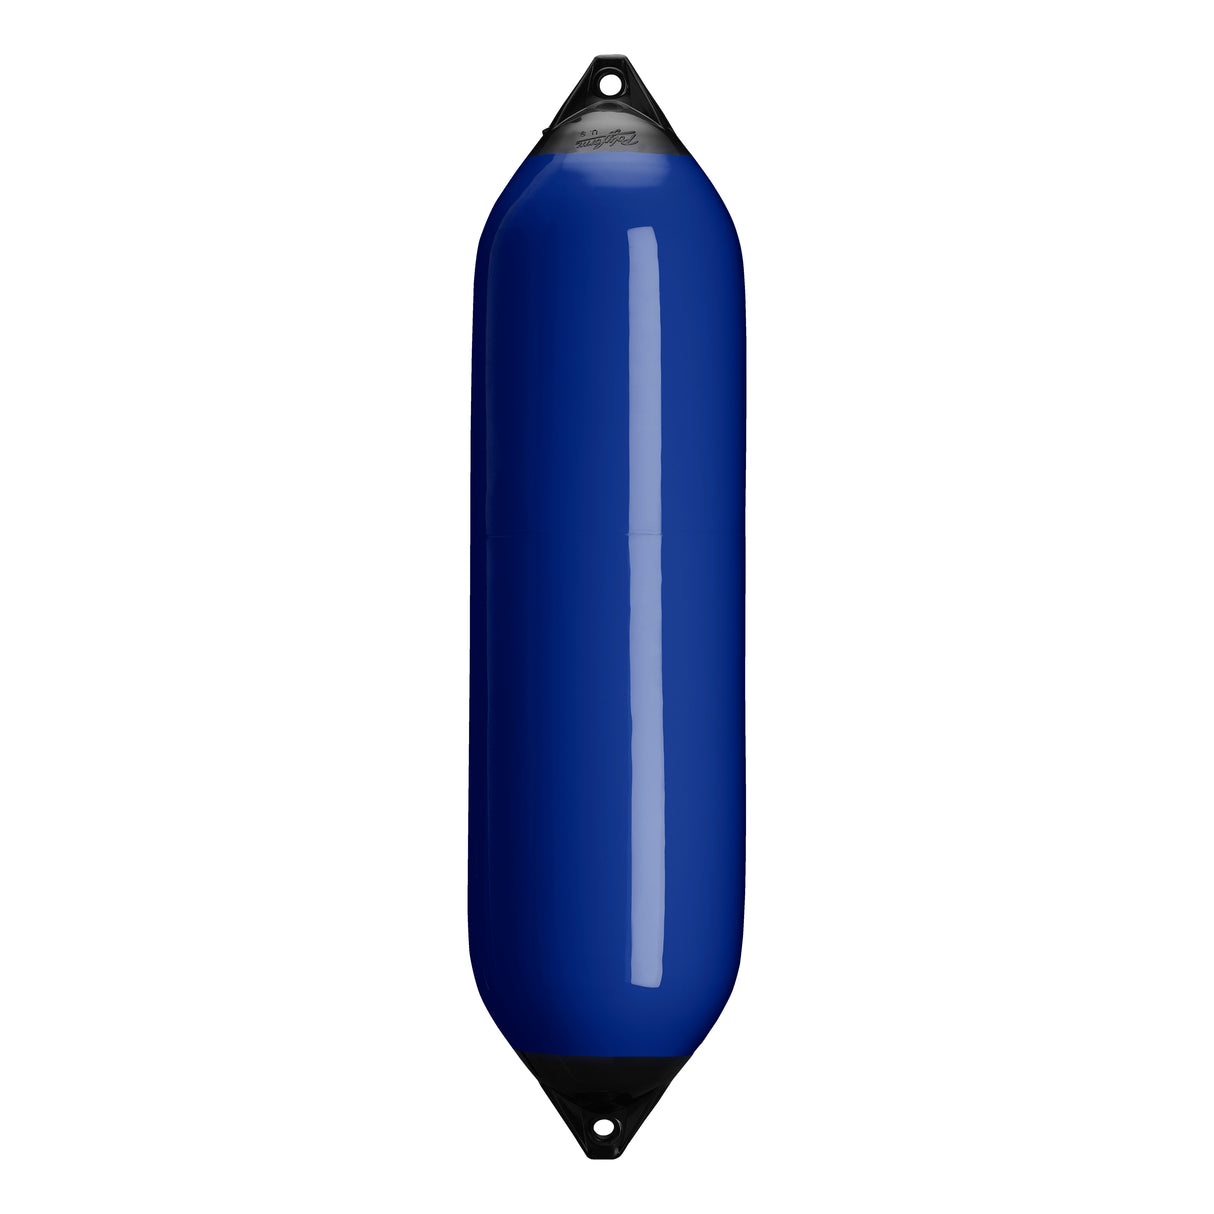 Cobalt Blue boat fender with Navy-Top, Polyform F-8